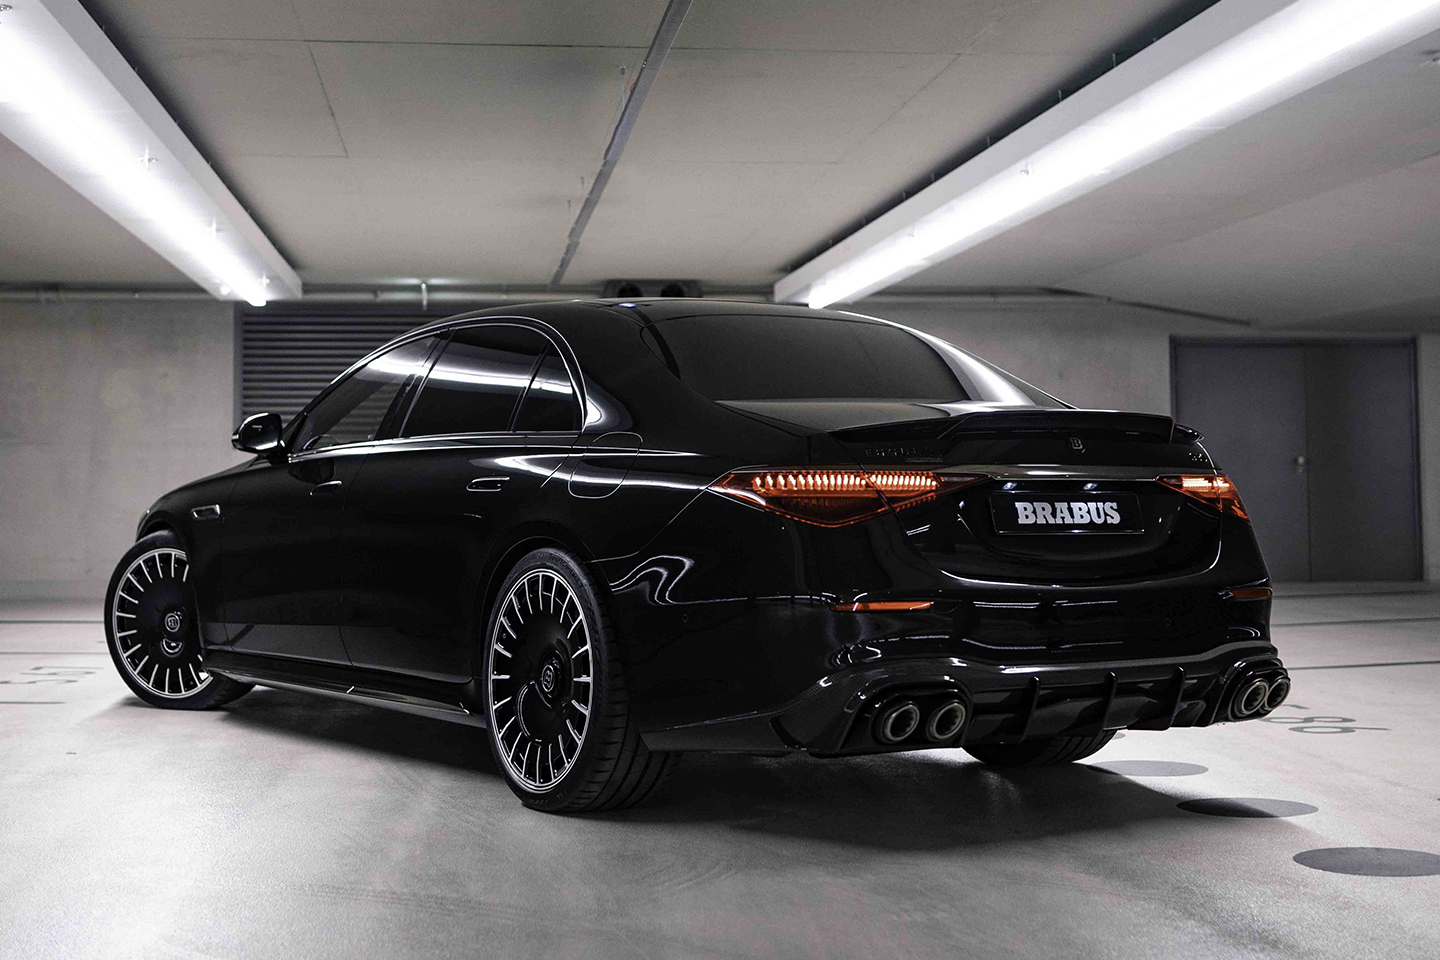 New Brabus S-Class gets 930hp, does 50mpg